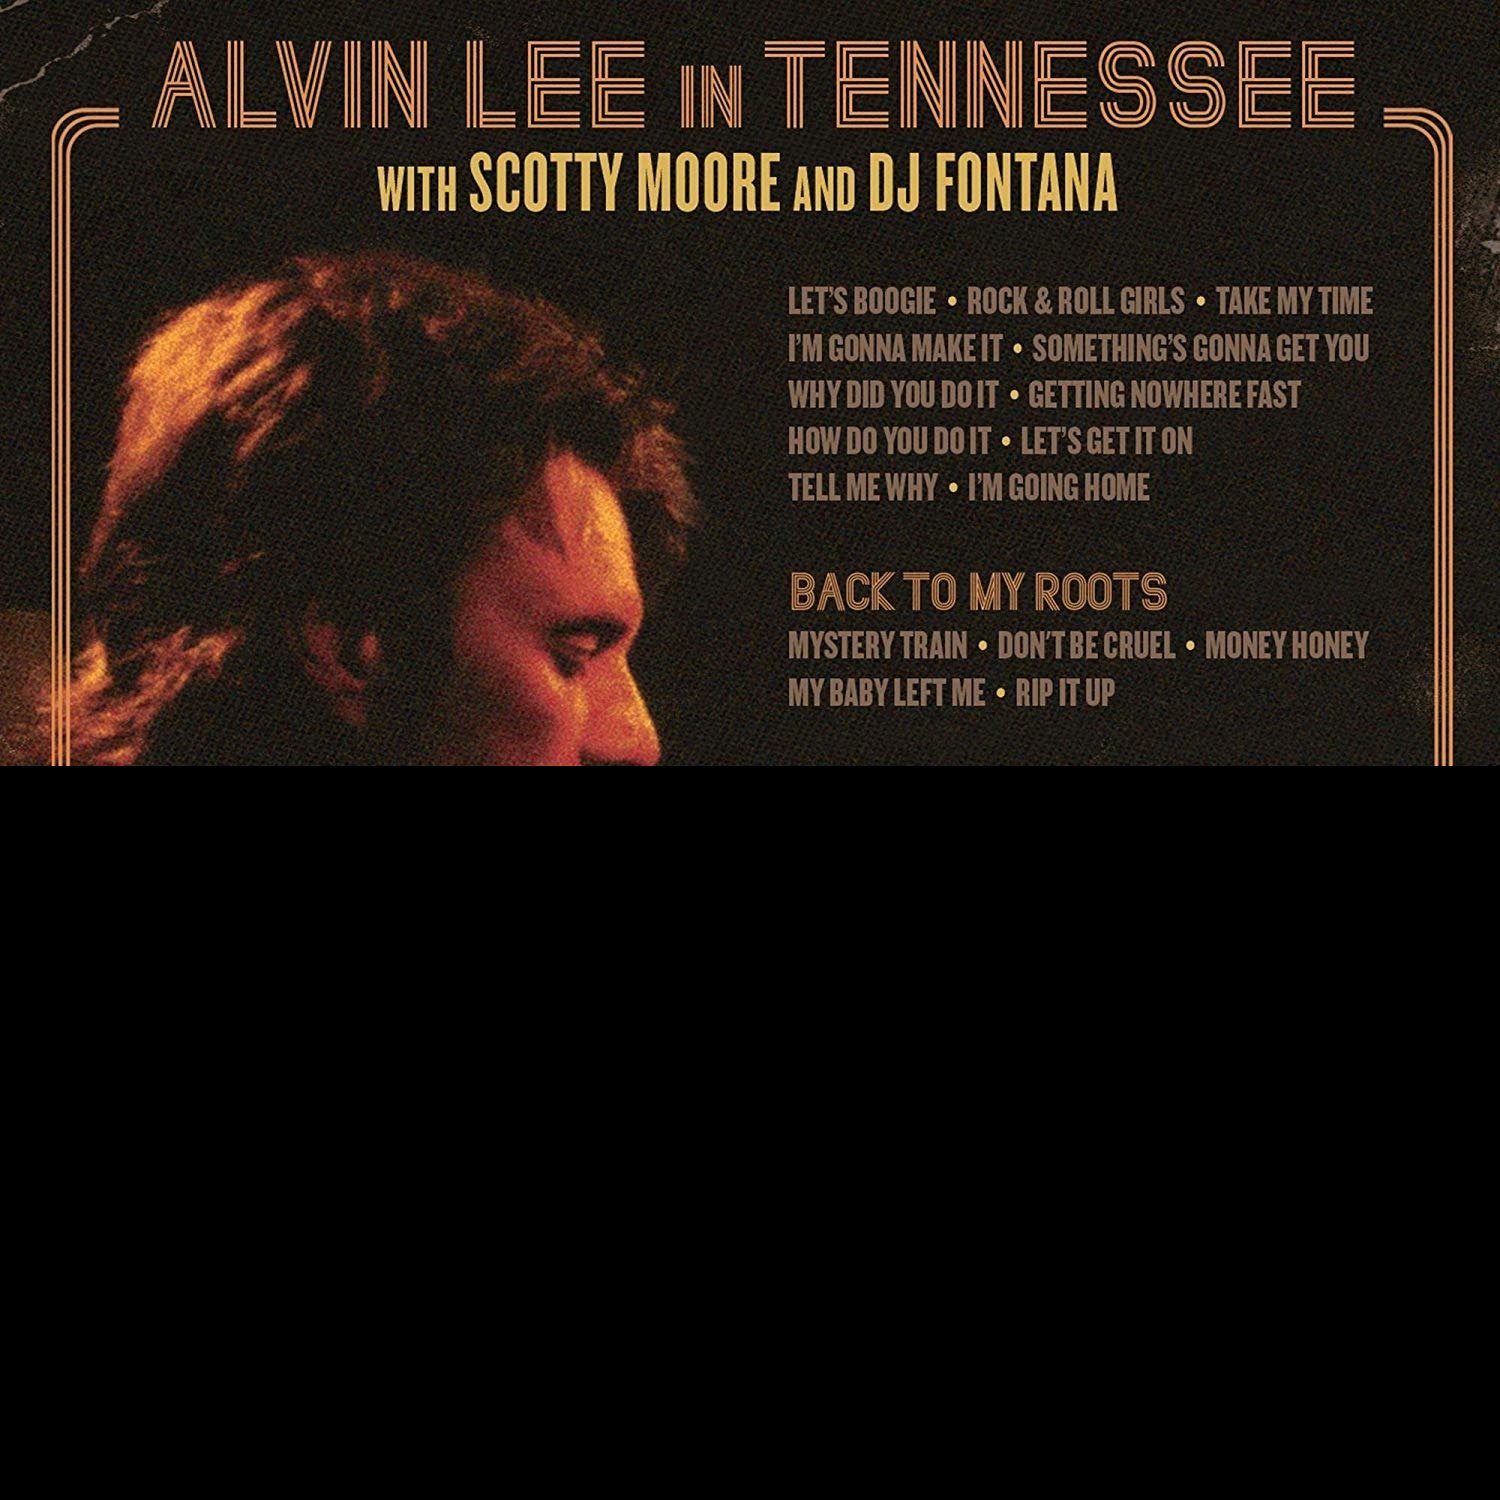 CD Shop - LEE, ALVIN ALVIN LEE IN TENNESSEE / BACK TO MY ROOTS